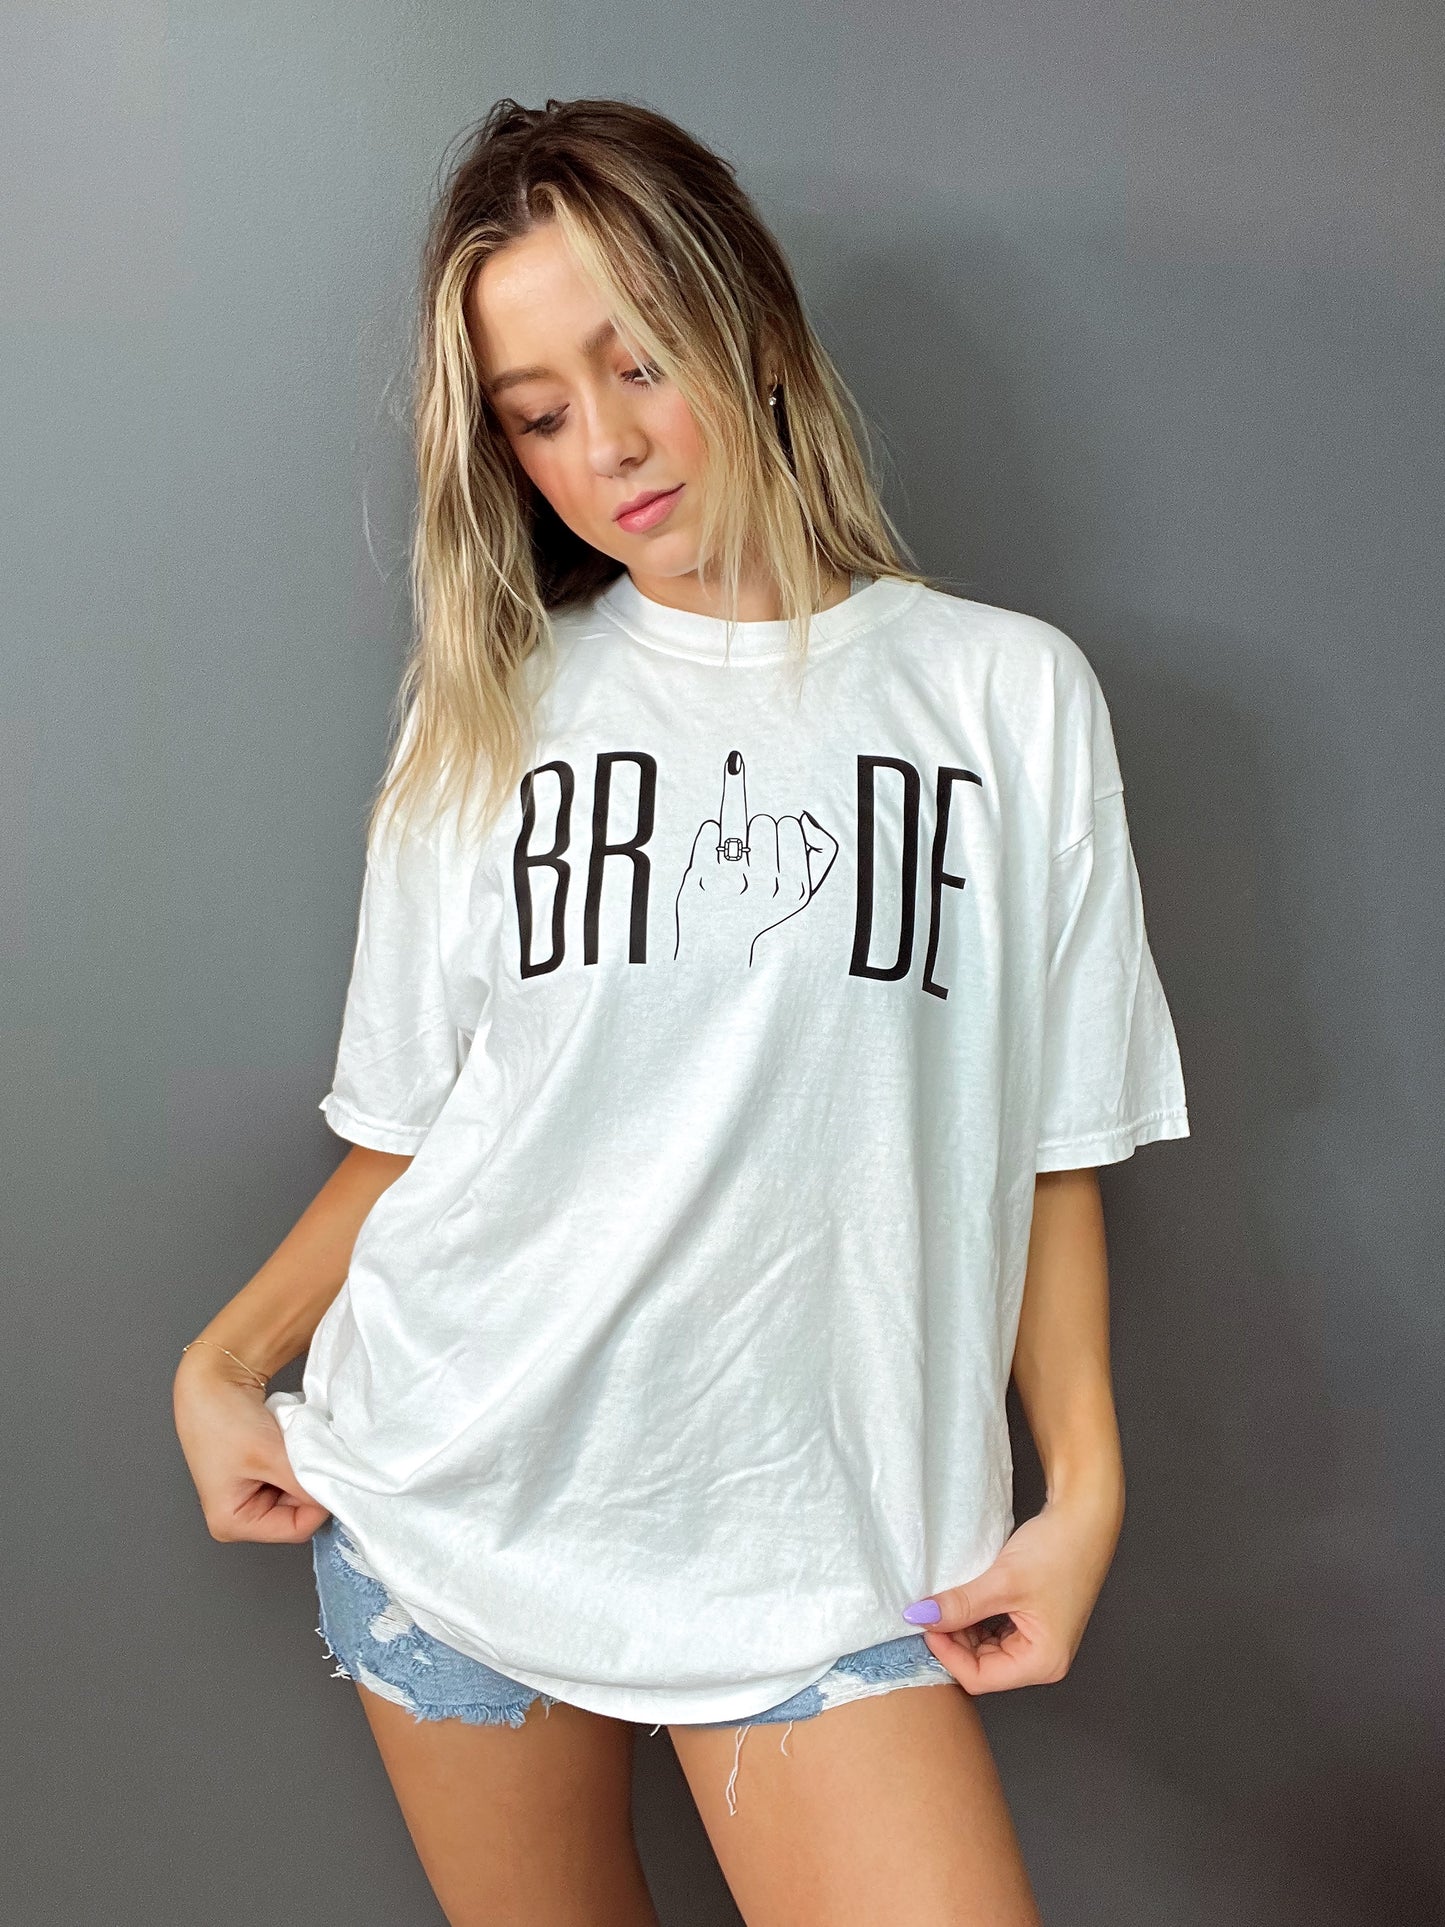 BRIDE Ring Finger Graphic Tee